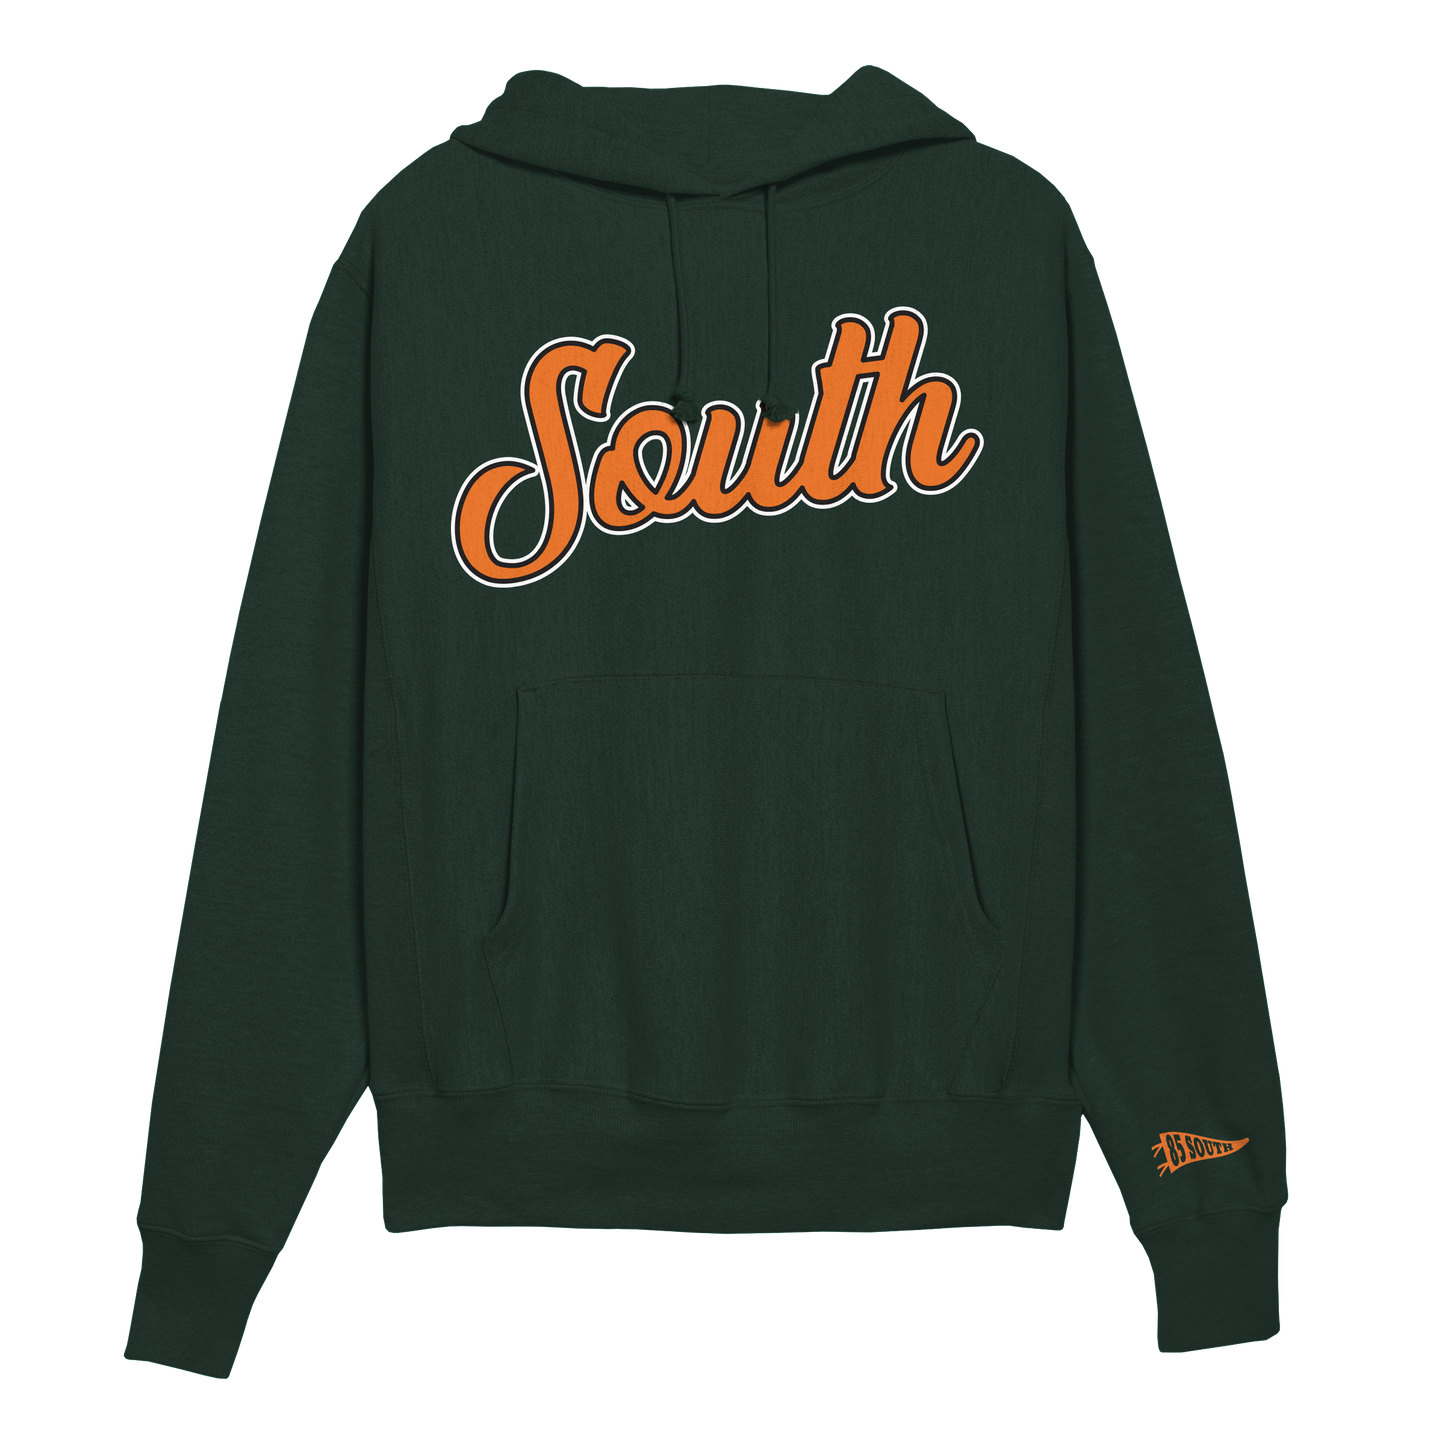 City Edition South Script Hoodie-Tallahassee